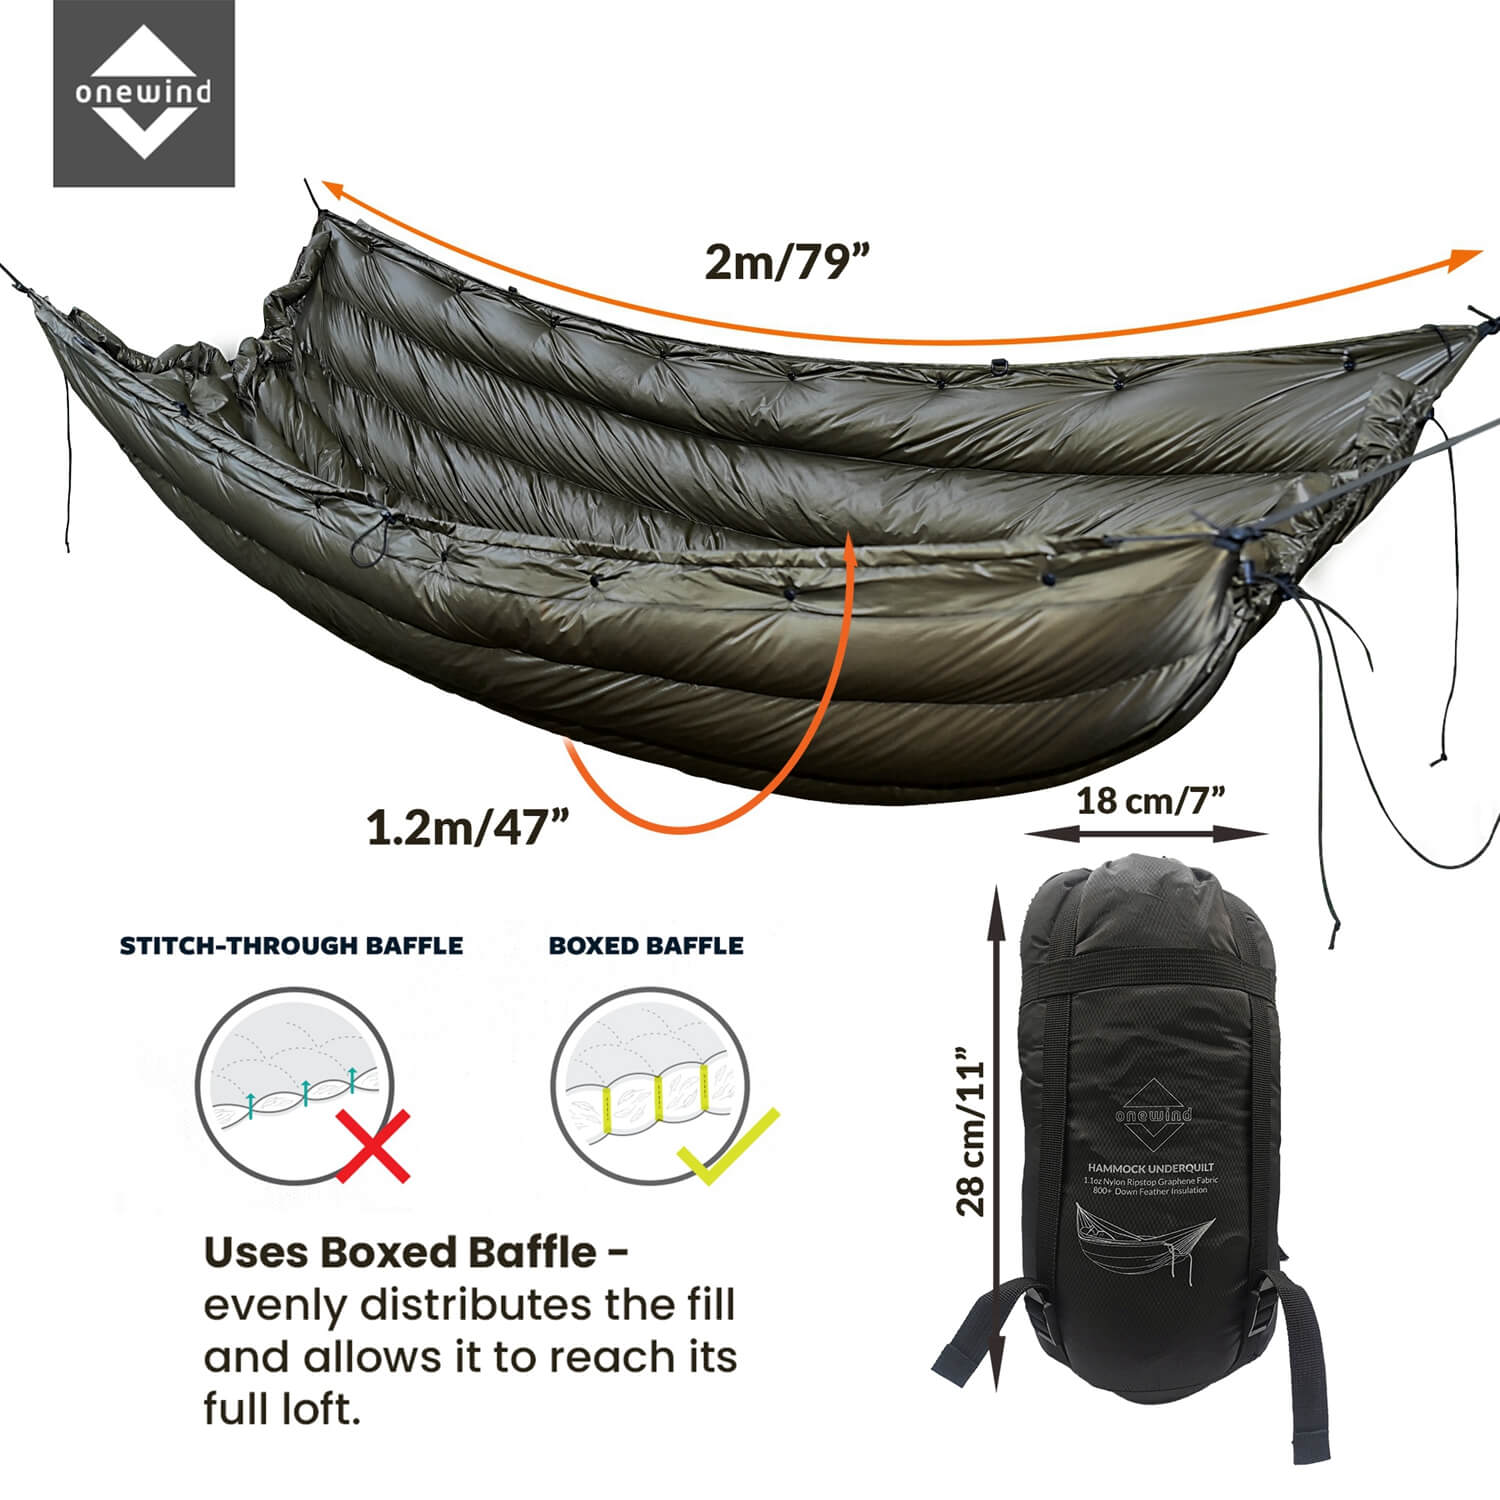 Down Underquilt Features | Onewind Outdoors